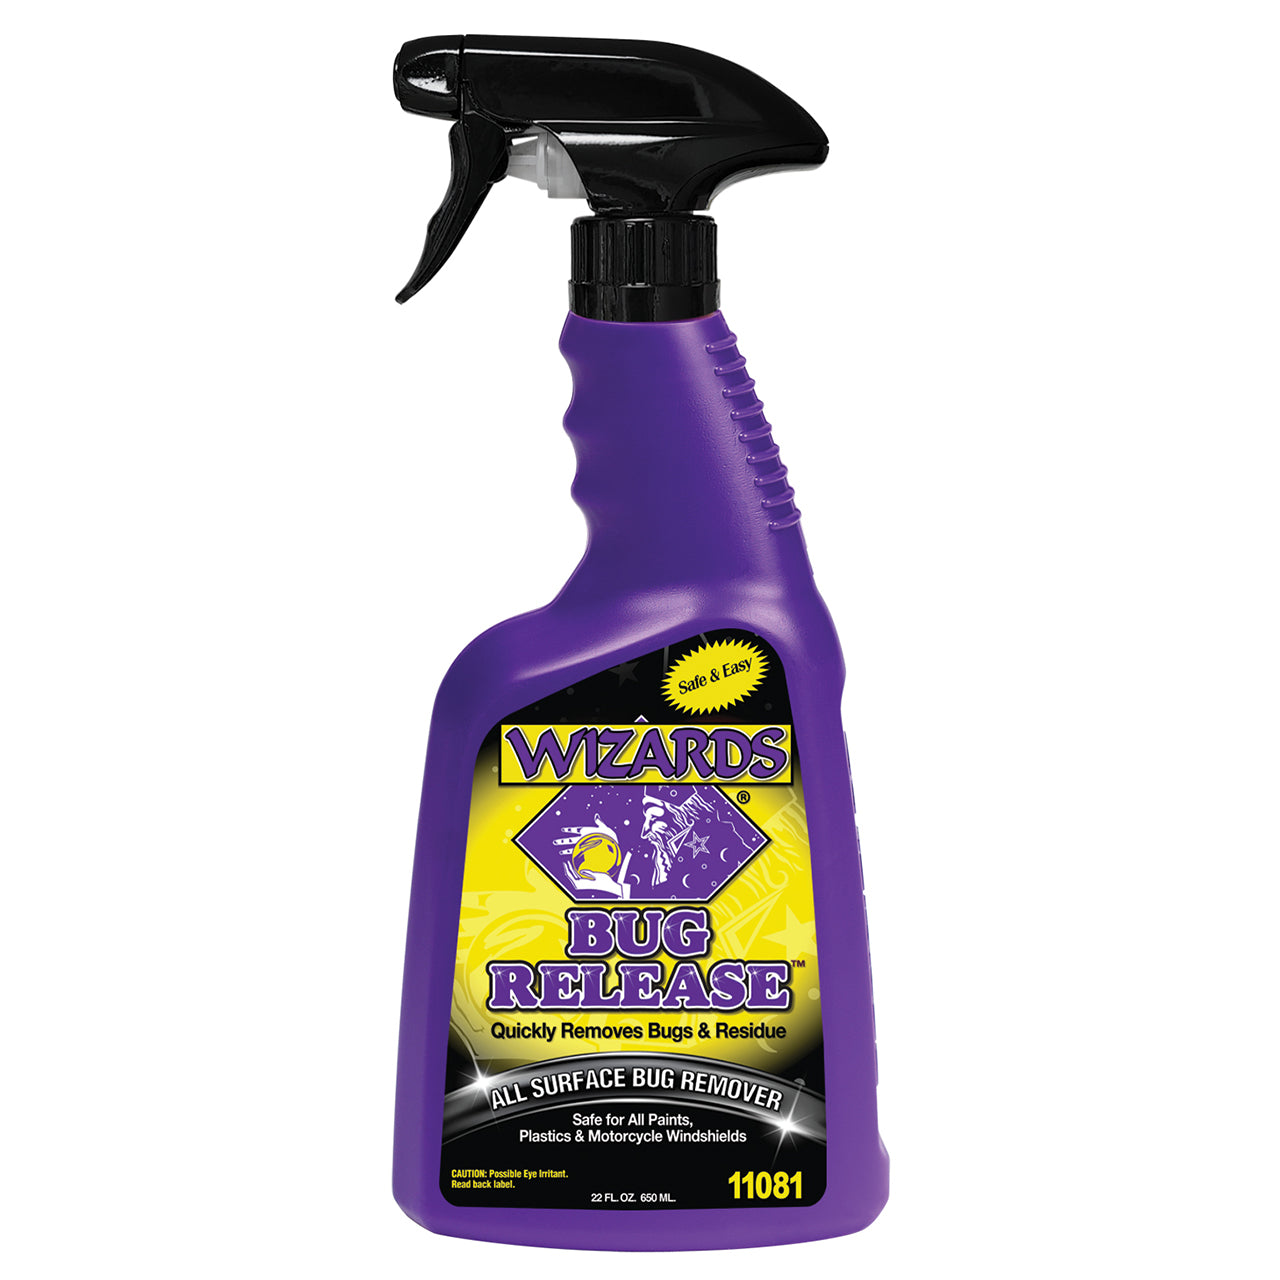 Why use a Bug Remover when you have All-Purpose Cleaner? 